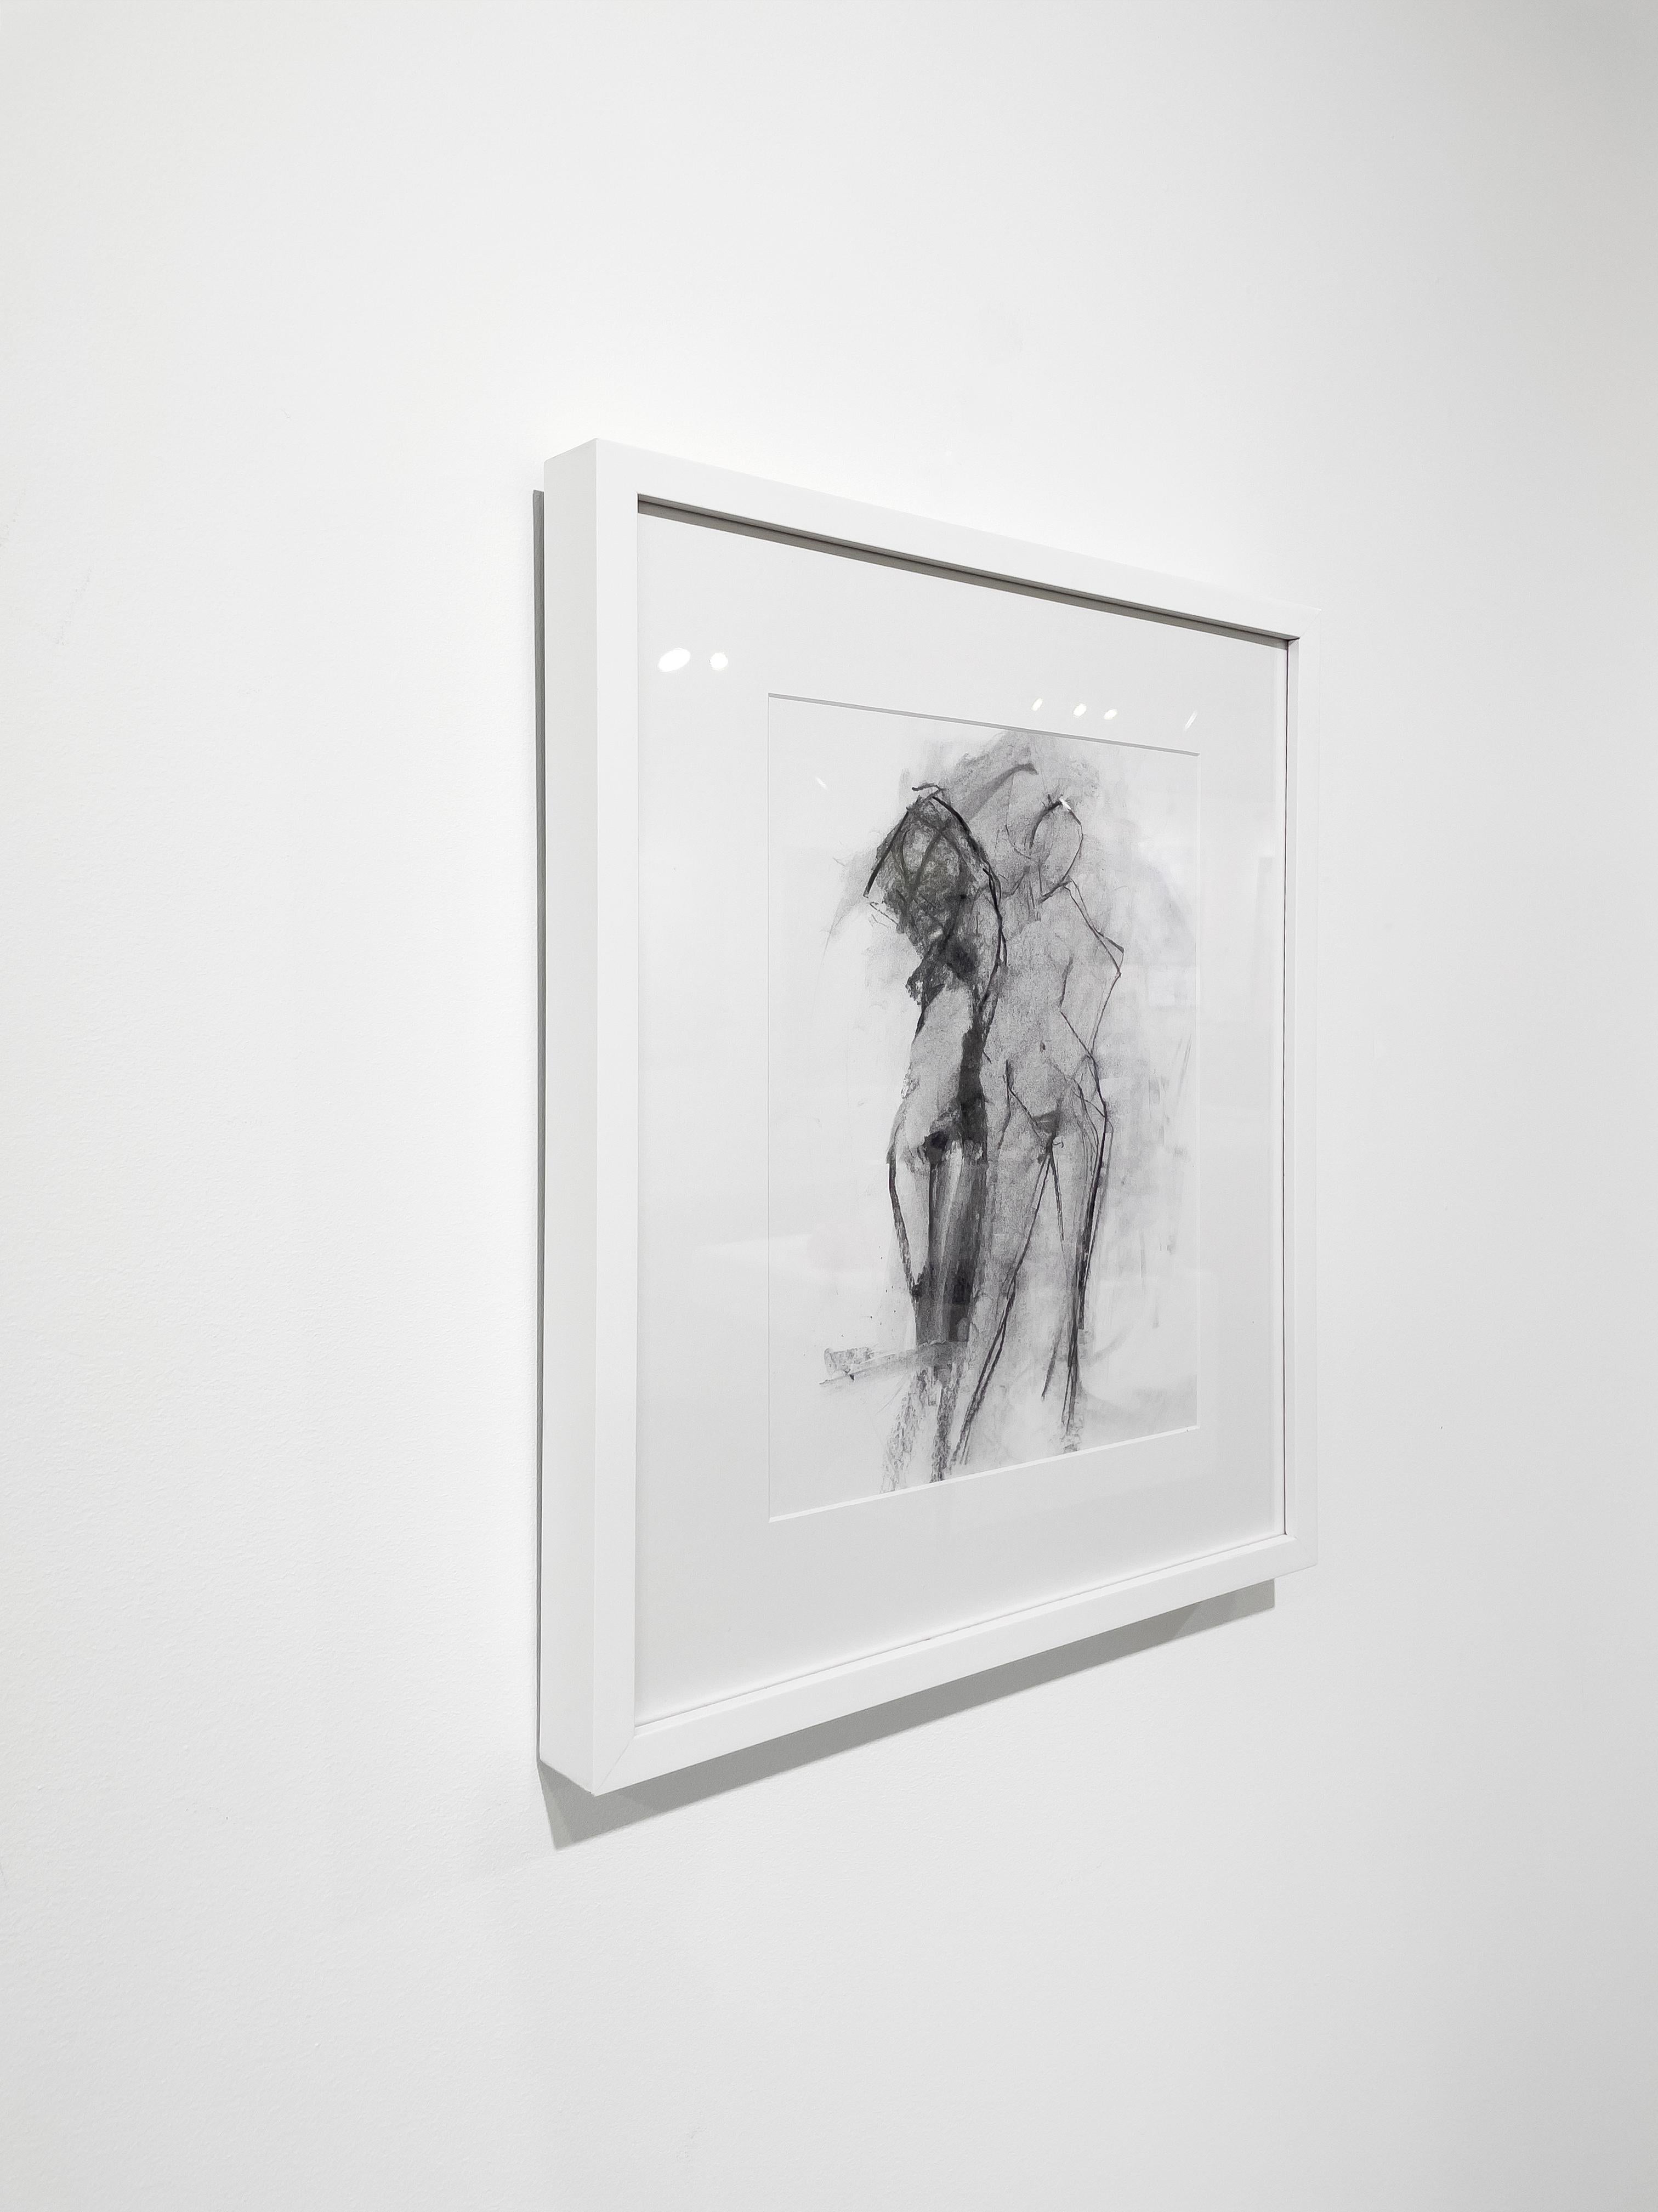 This abstract nude figure drawing by Kelly Rossetti features a light charcoal grey palette on white paper, with an expressive line drawing of nude figures and an almost Cubist style influence. The drawing itself is 16